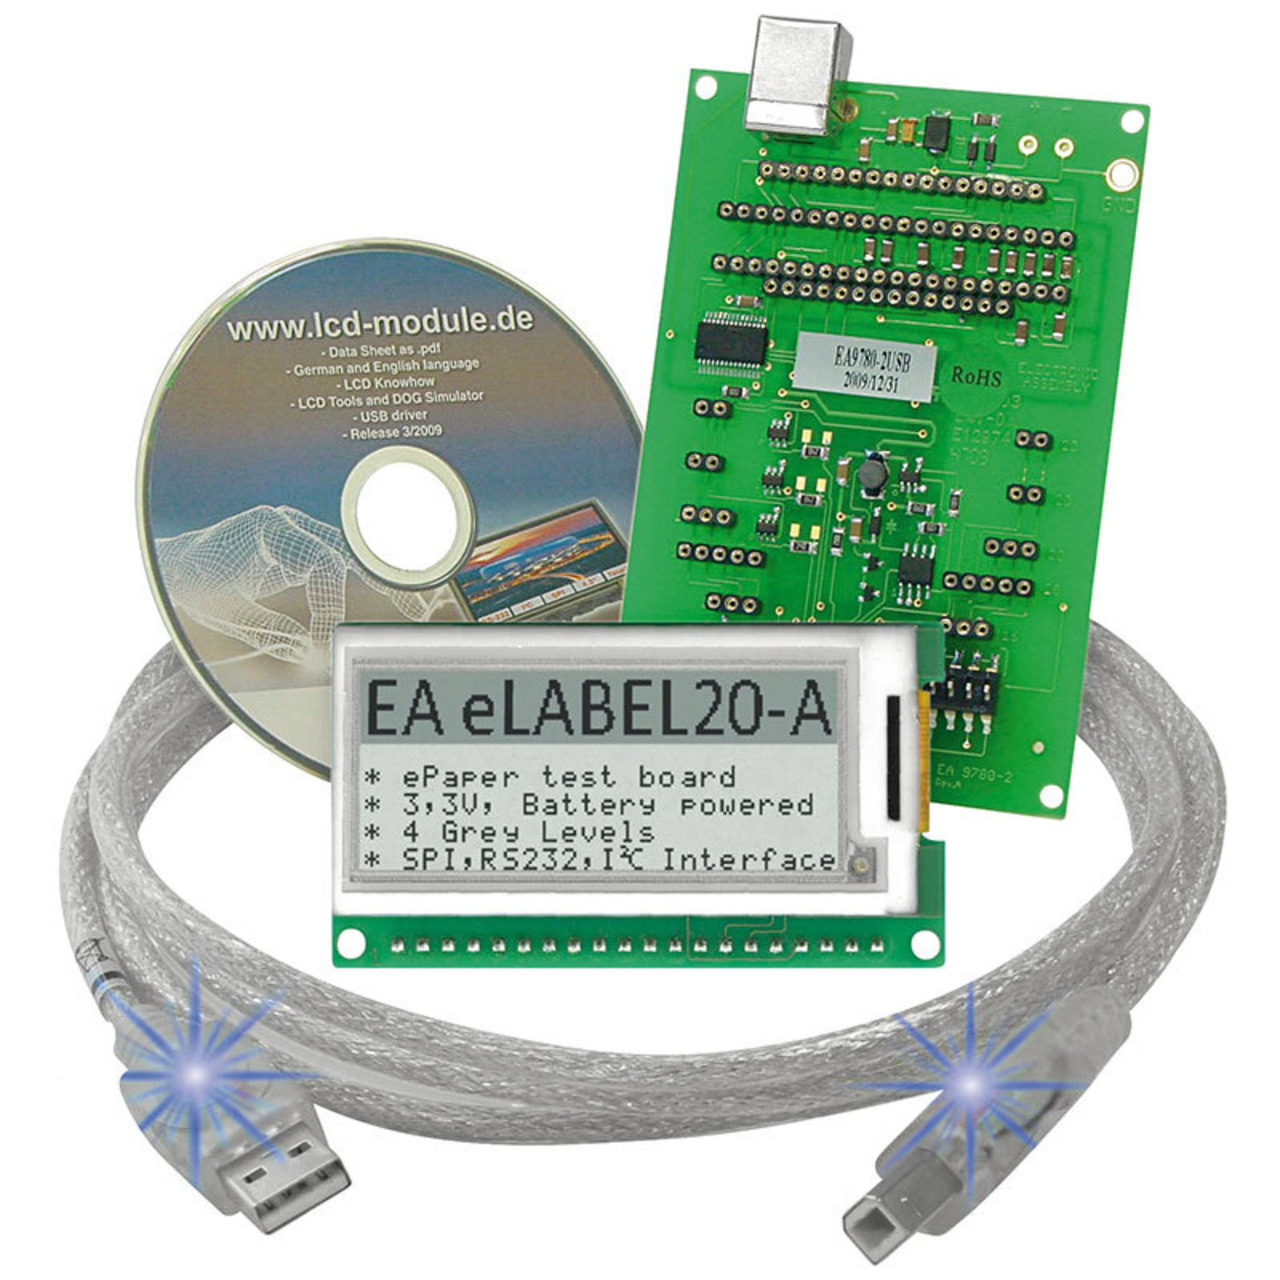 Electronic Assembly ePaper Display EA EVALEPA20-A- 172 x 72 Pixel- mit Ansteuerung und USB-Interface